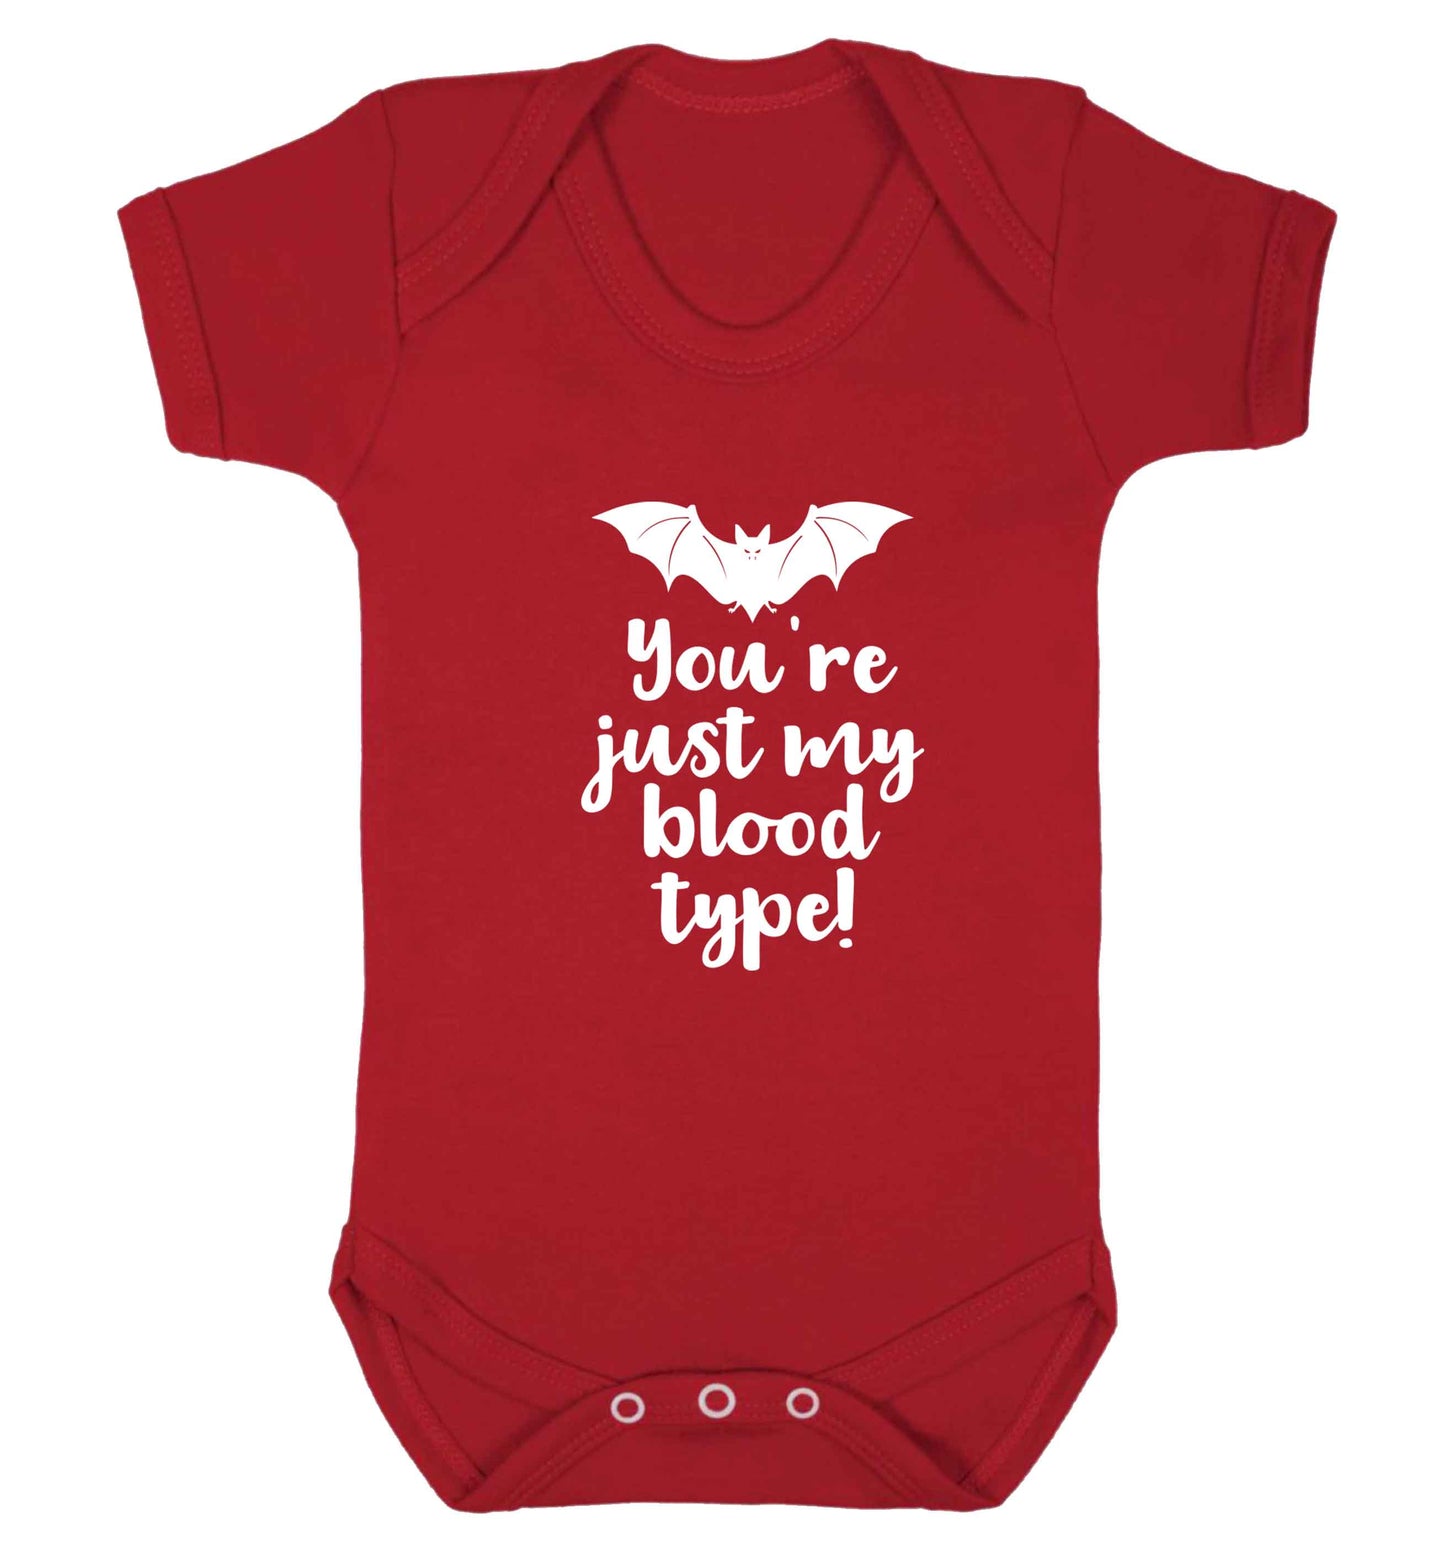 You're just my blood type baby vest red 18-24 months